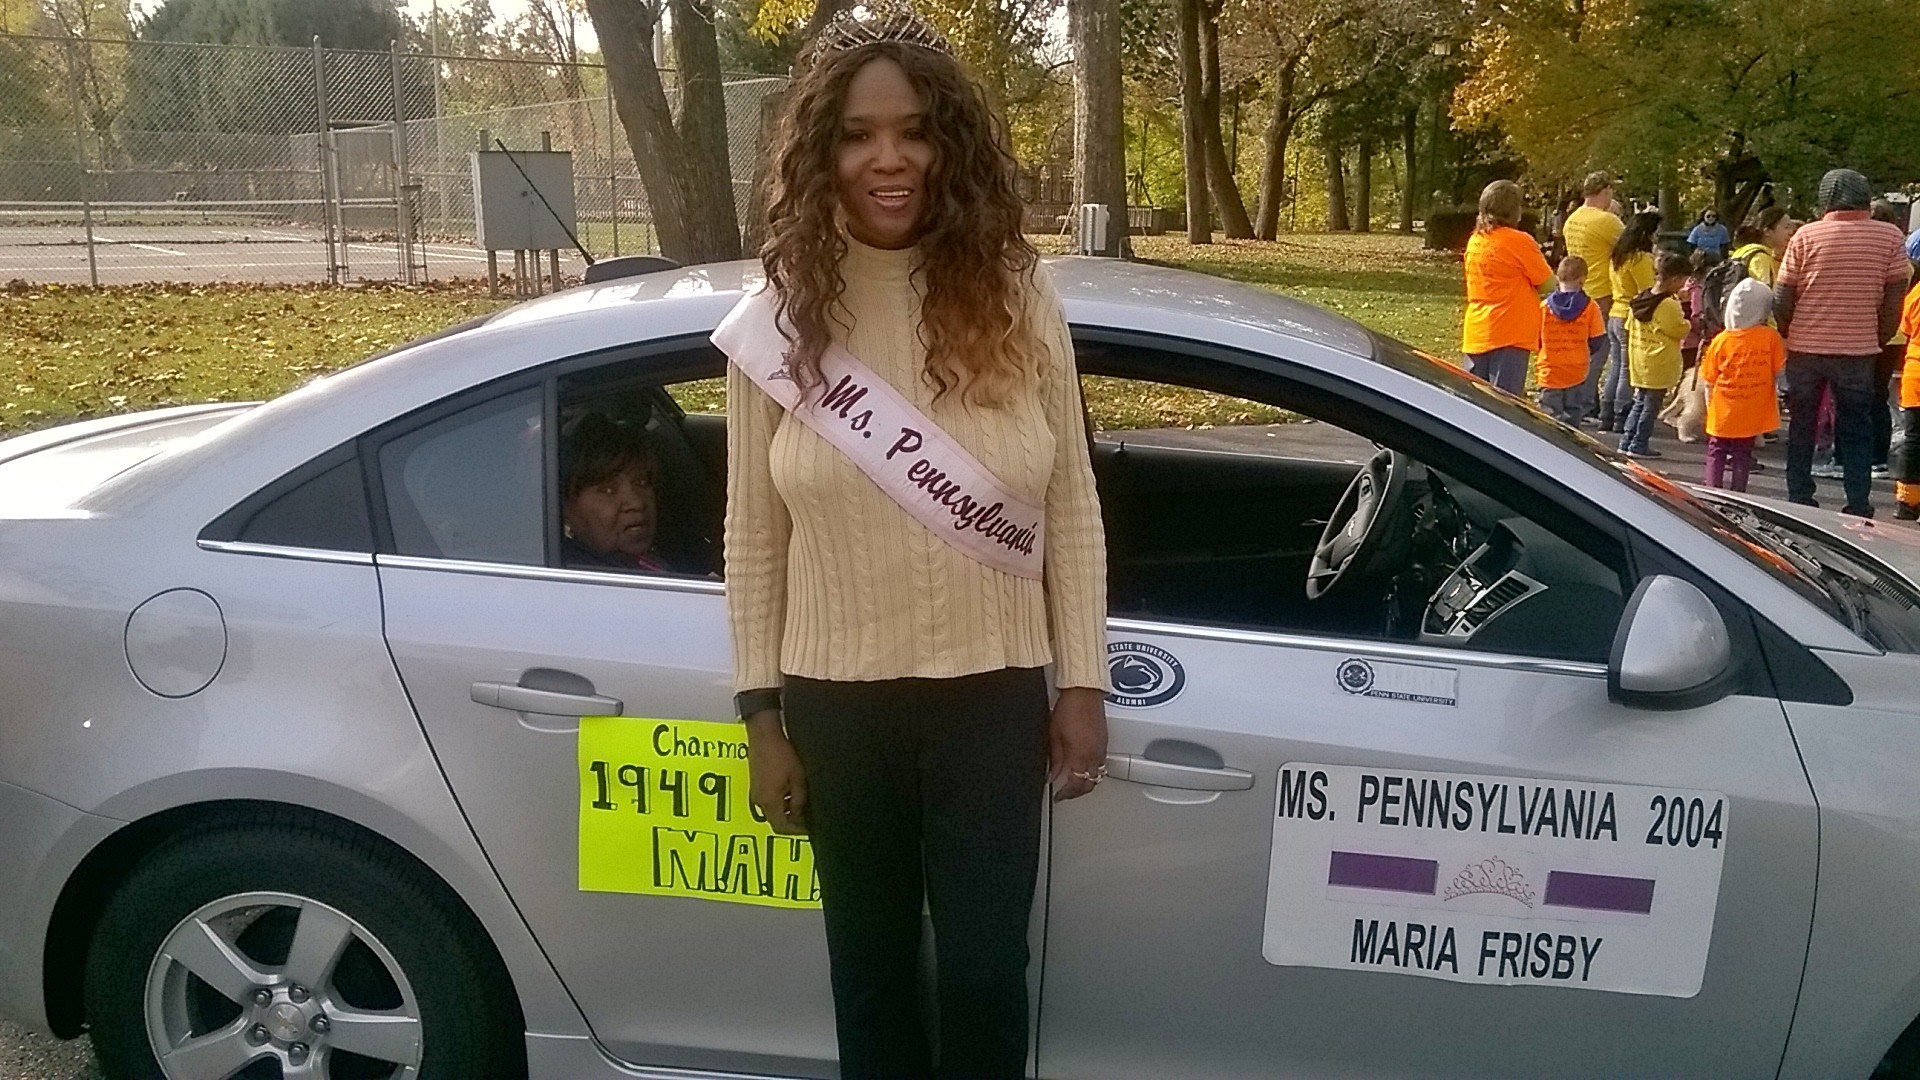 Ms.Pennsylvania 2004 Maria Frisby and 1949 Queen's Court Attendant Charmaine Moss in the 2015 Middletown Borough Homecoming Parade.